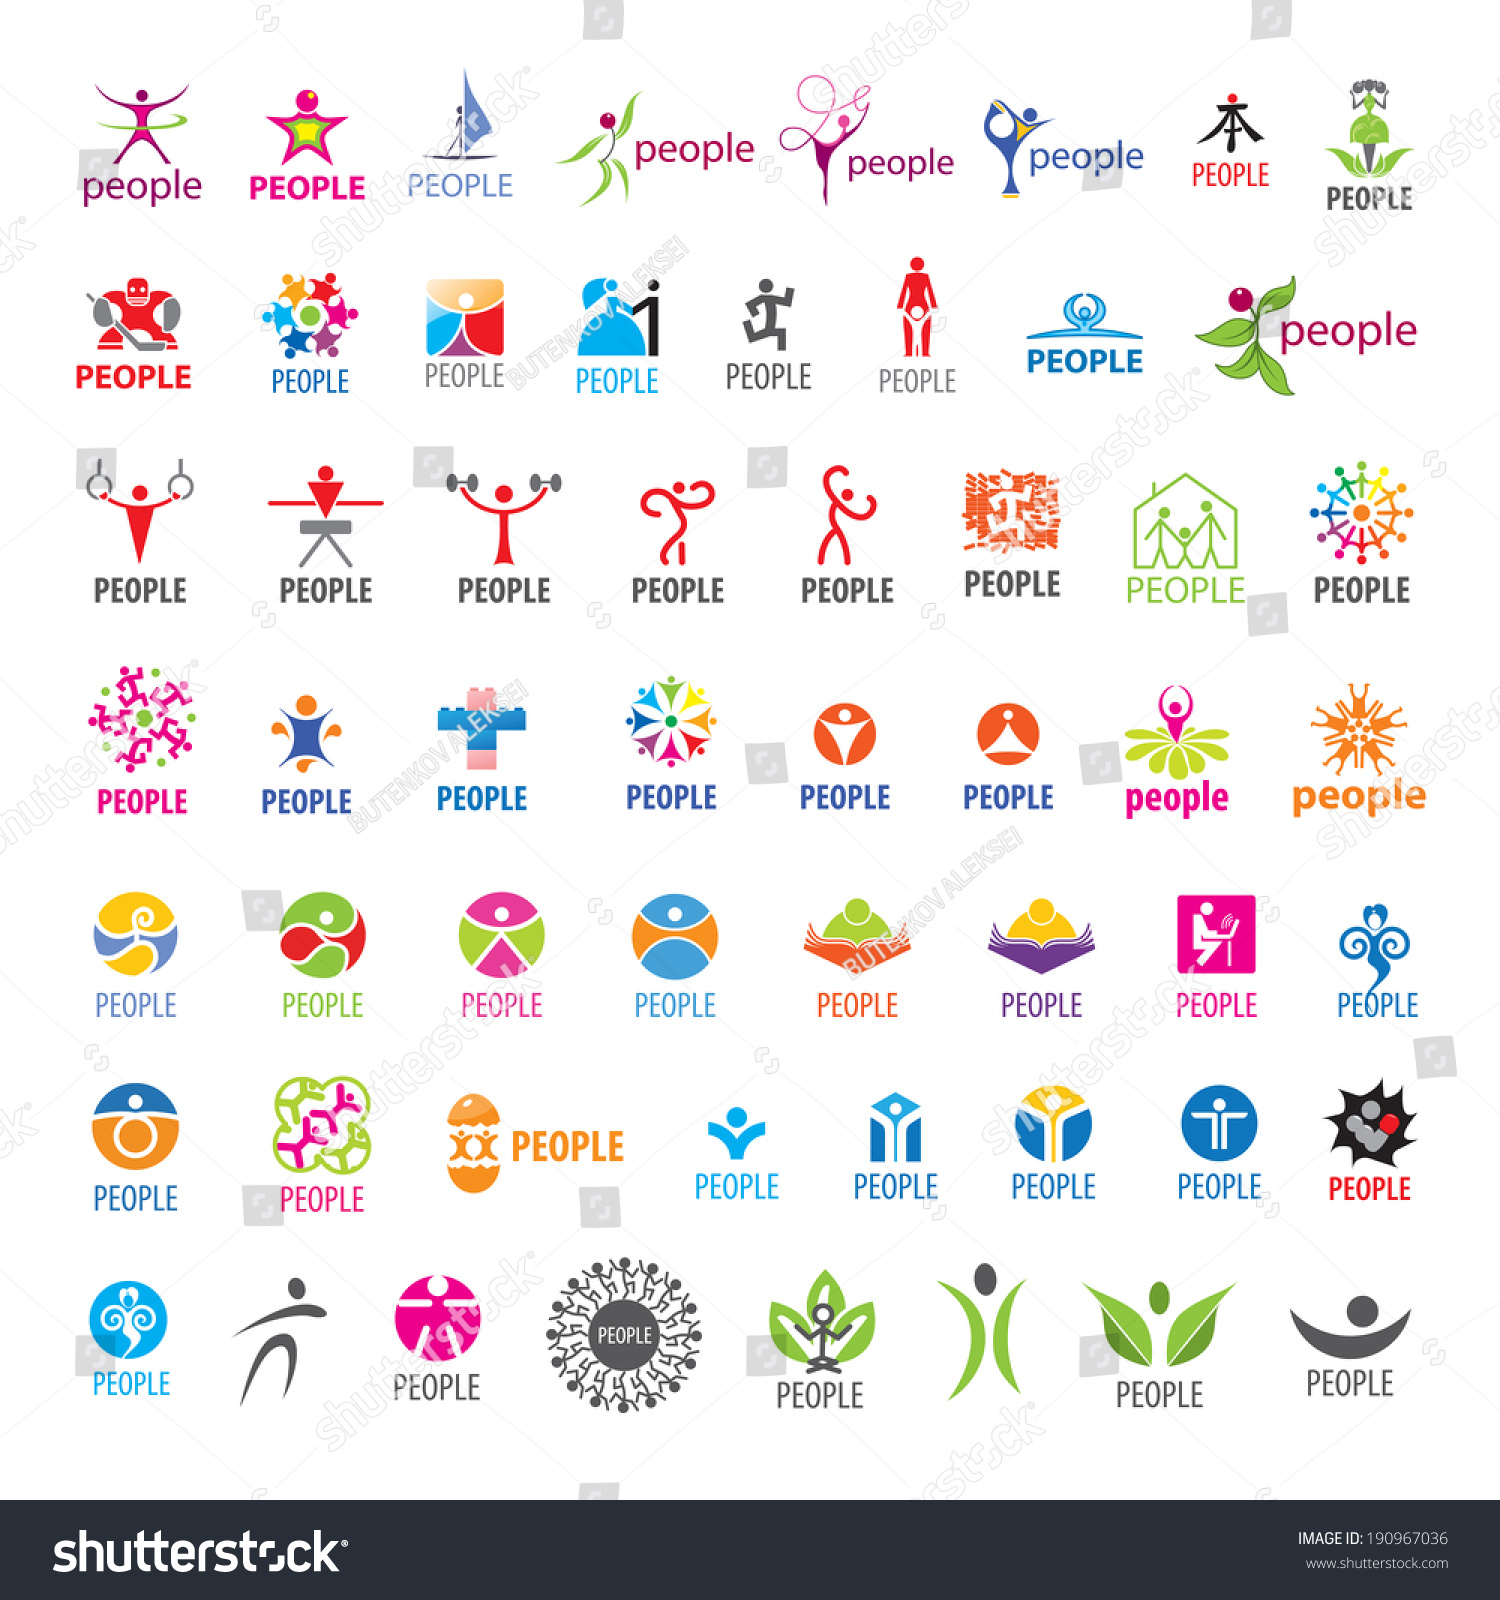 Biggest Collection Vector Icons People Stock Vector (Royalty Free ...